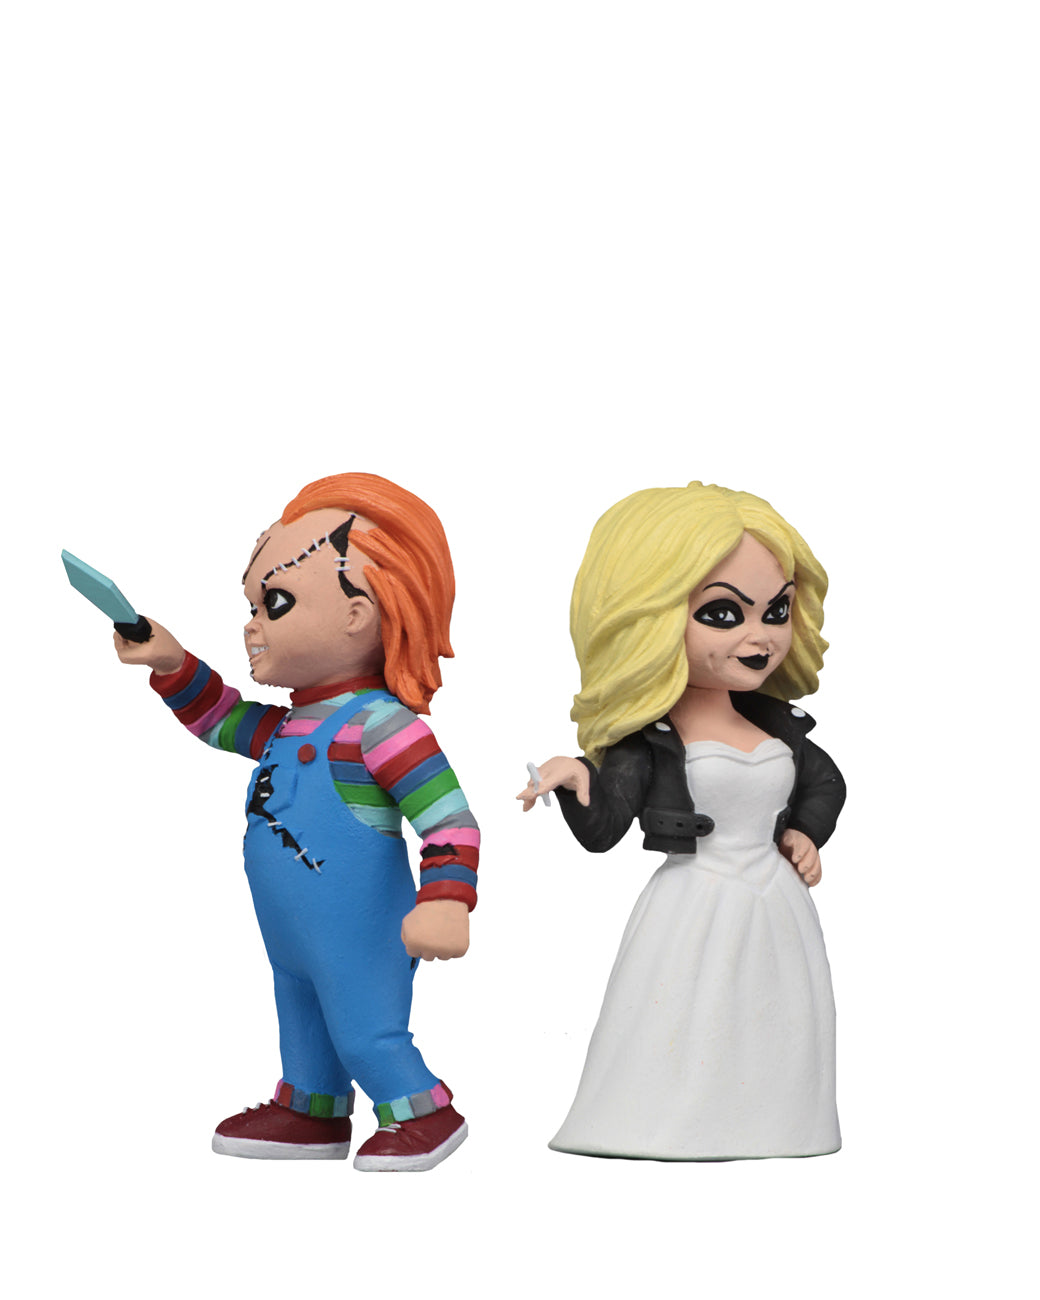 Chucky NECA Toony Terror action figure is wearing a striped shirt with coveralls, holding a knife and standing next to Tiffany in a white wedding dress, who is holding a cigarette.